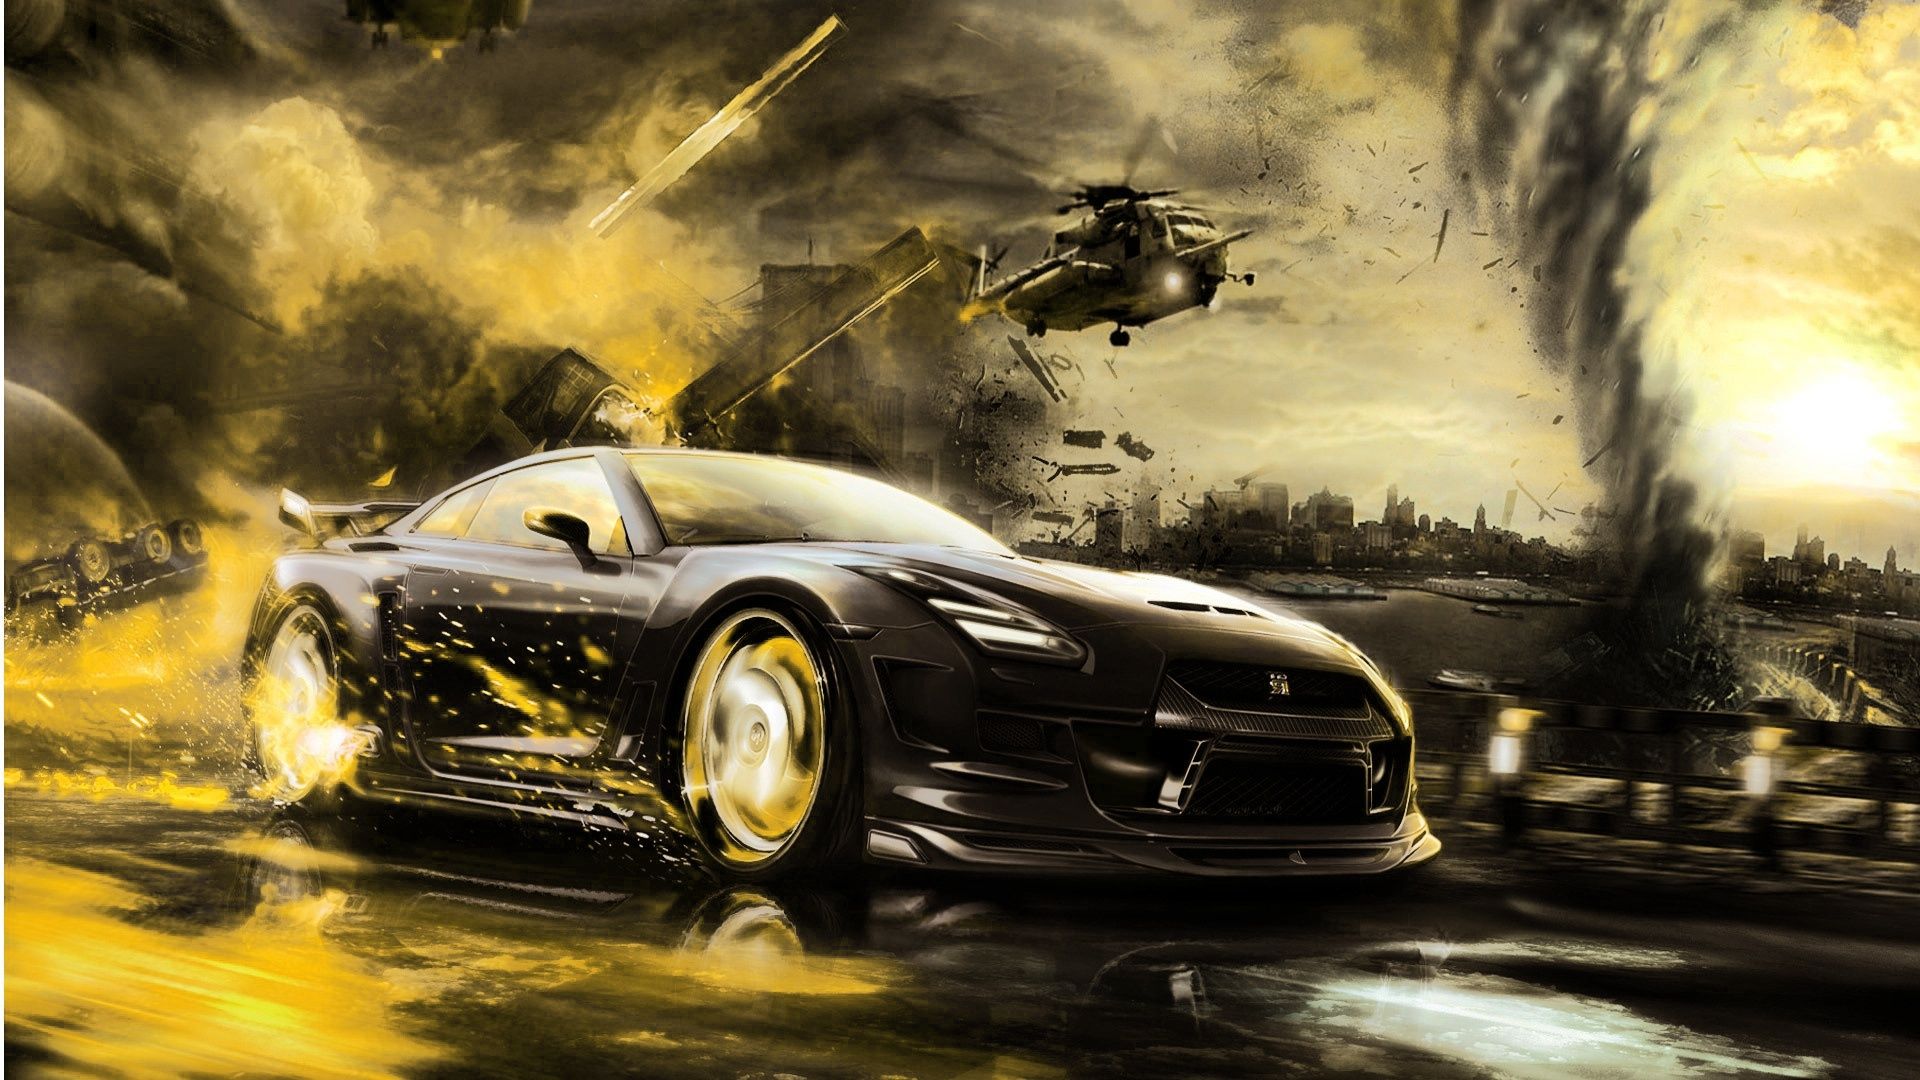 Awesome car wallpapers hd 1080p